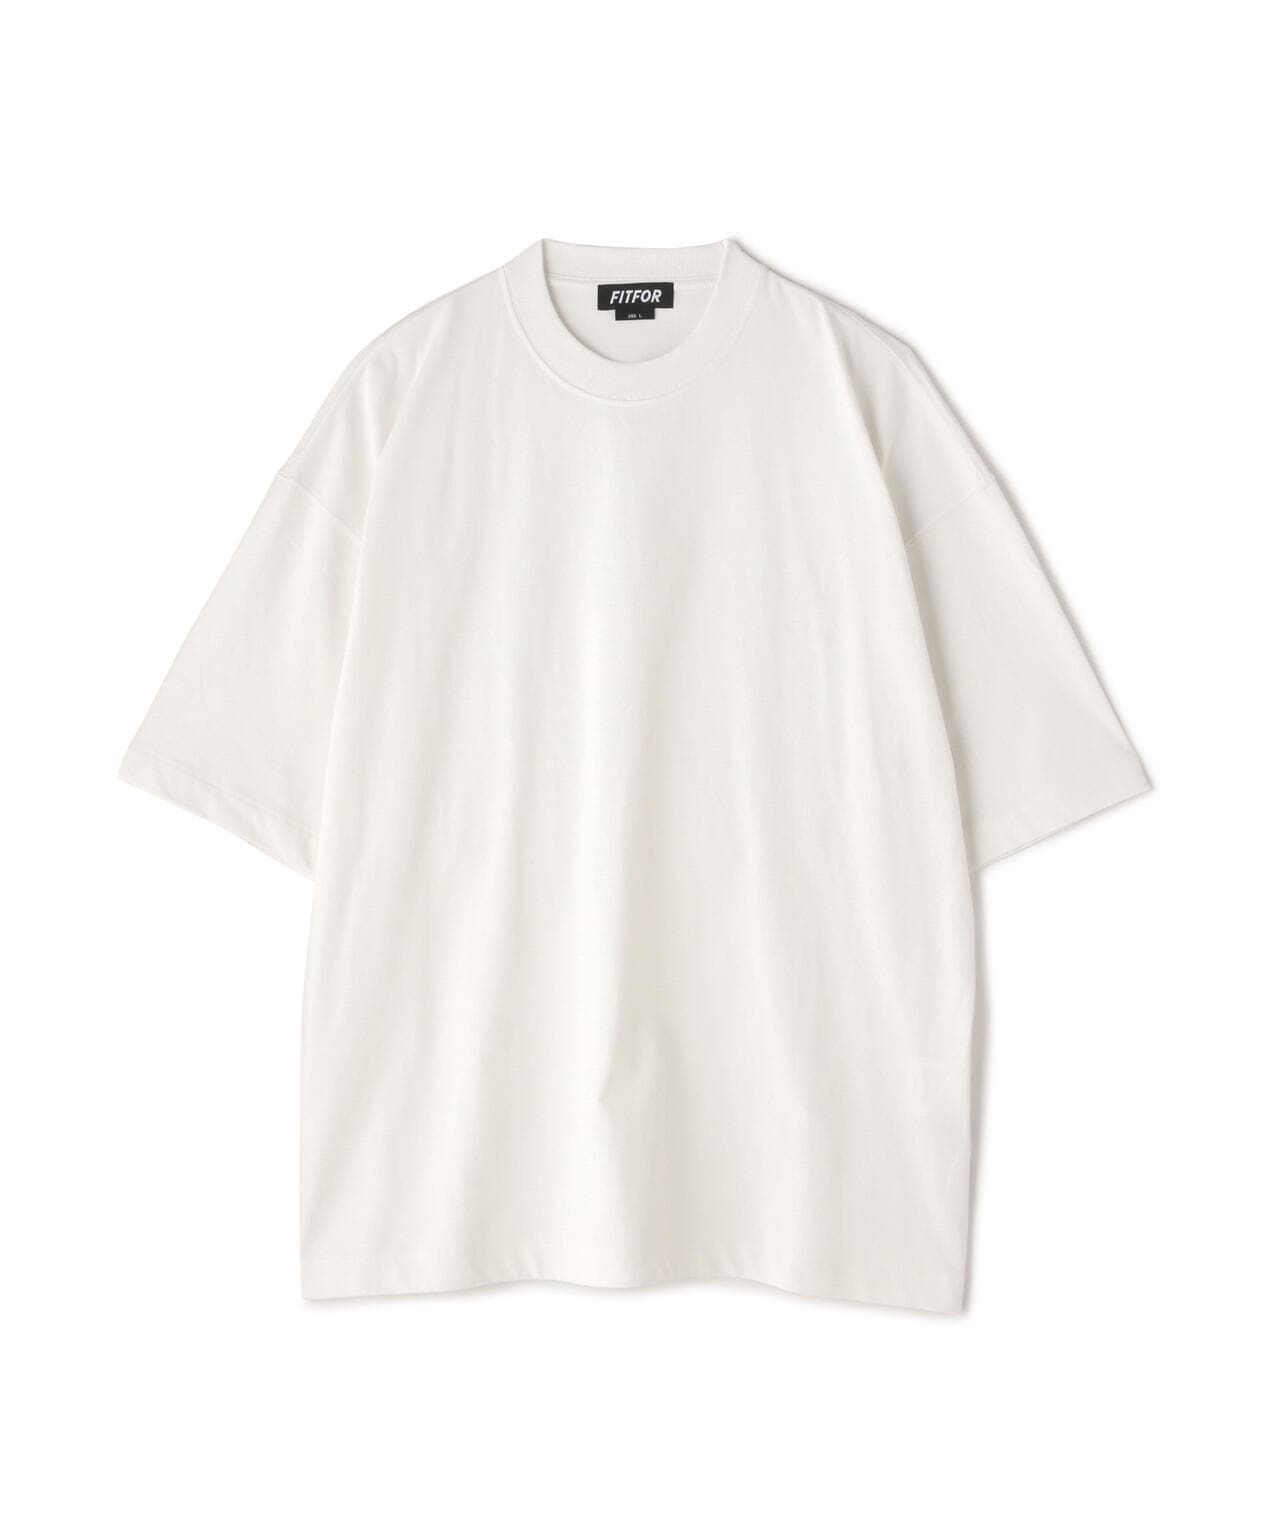 FIT FOR/フィットフォー/205 WIDE BOX TEE | GARDEN ( ガーデン ) | US 